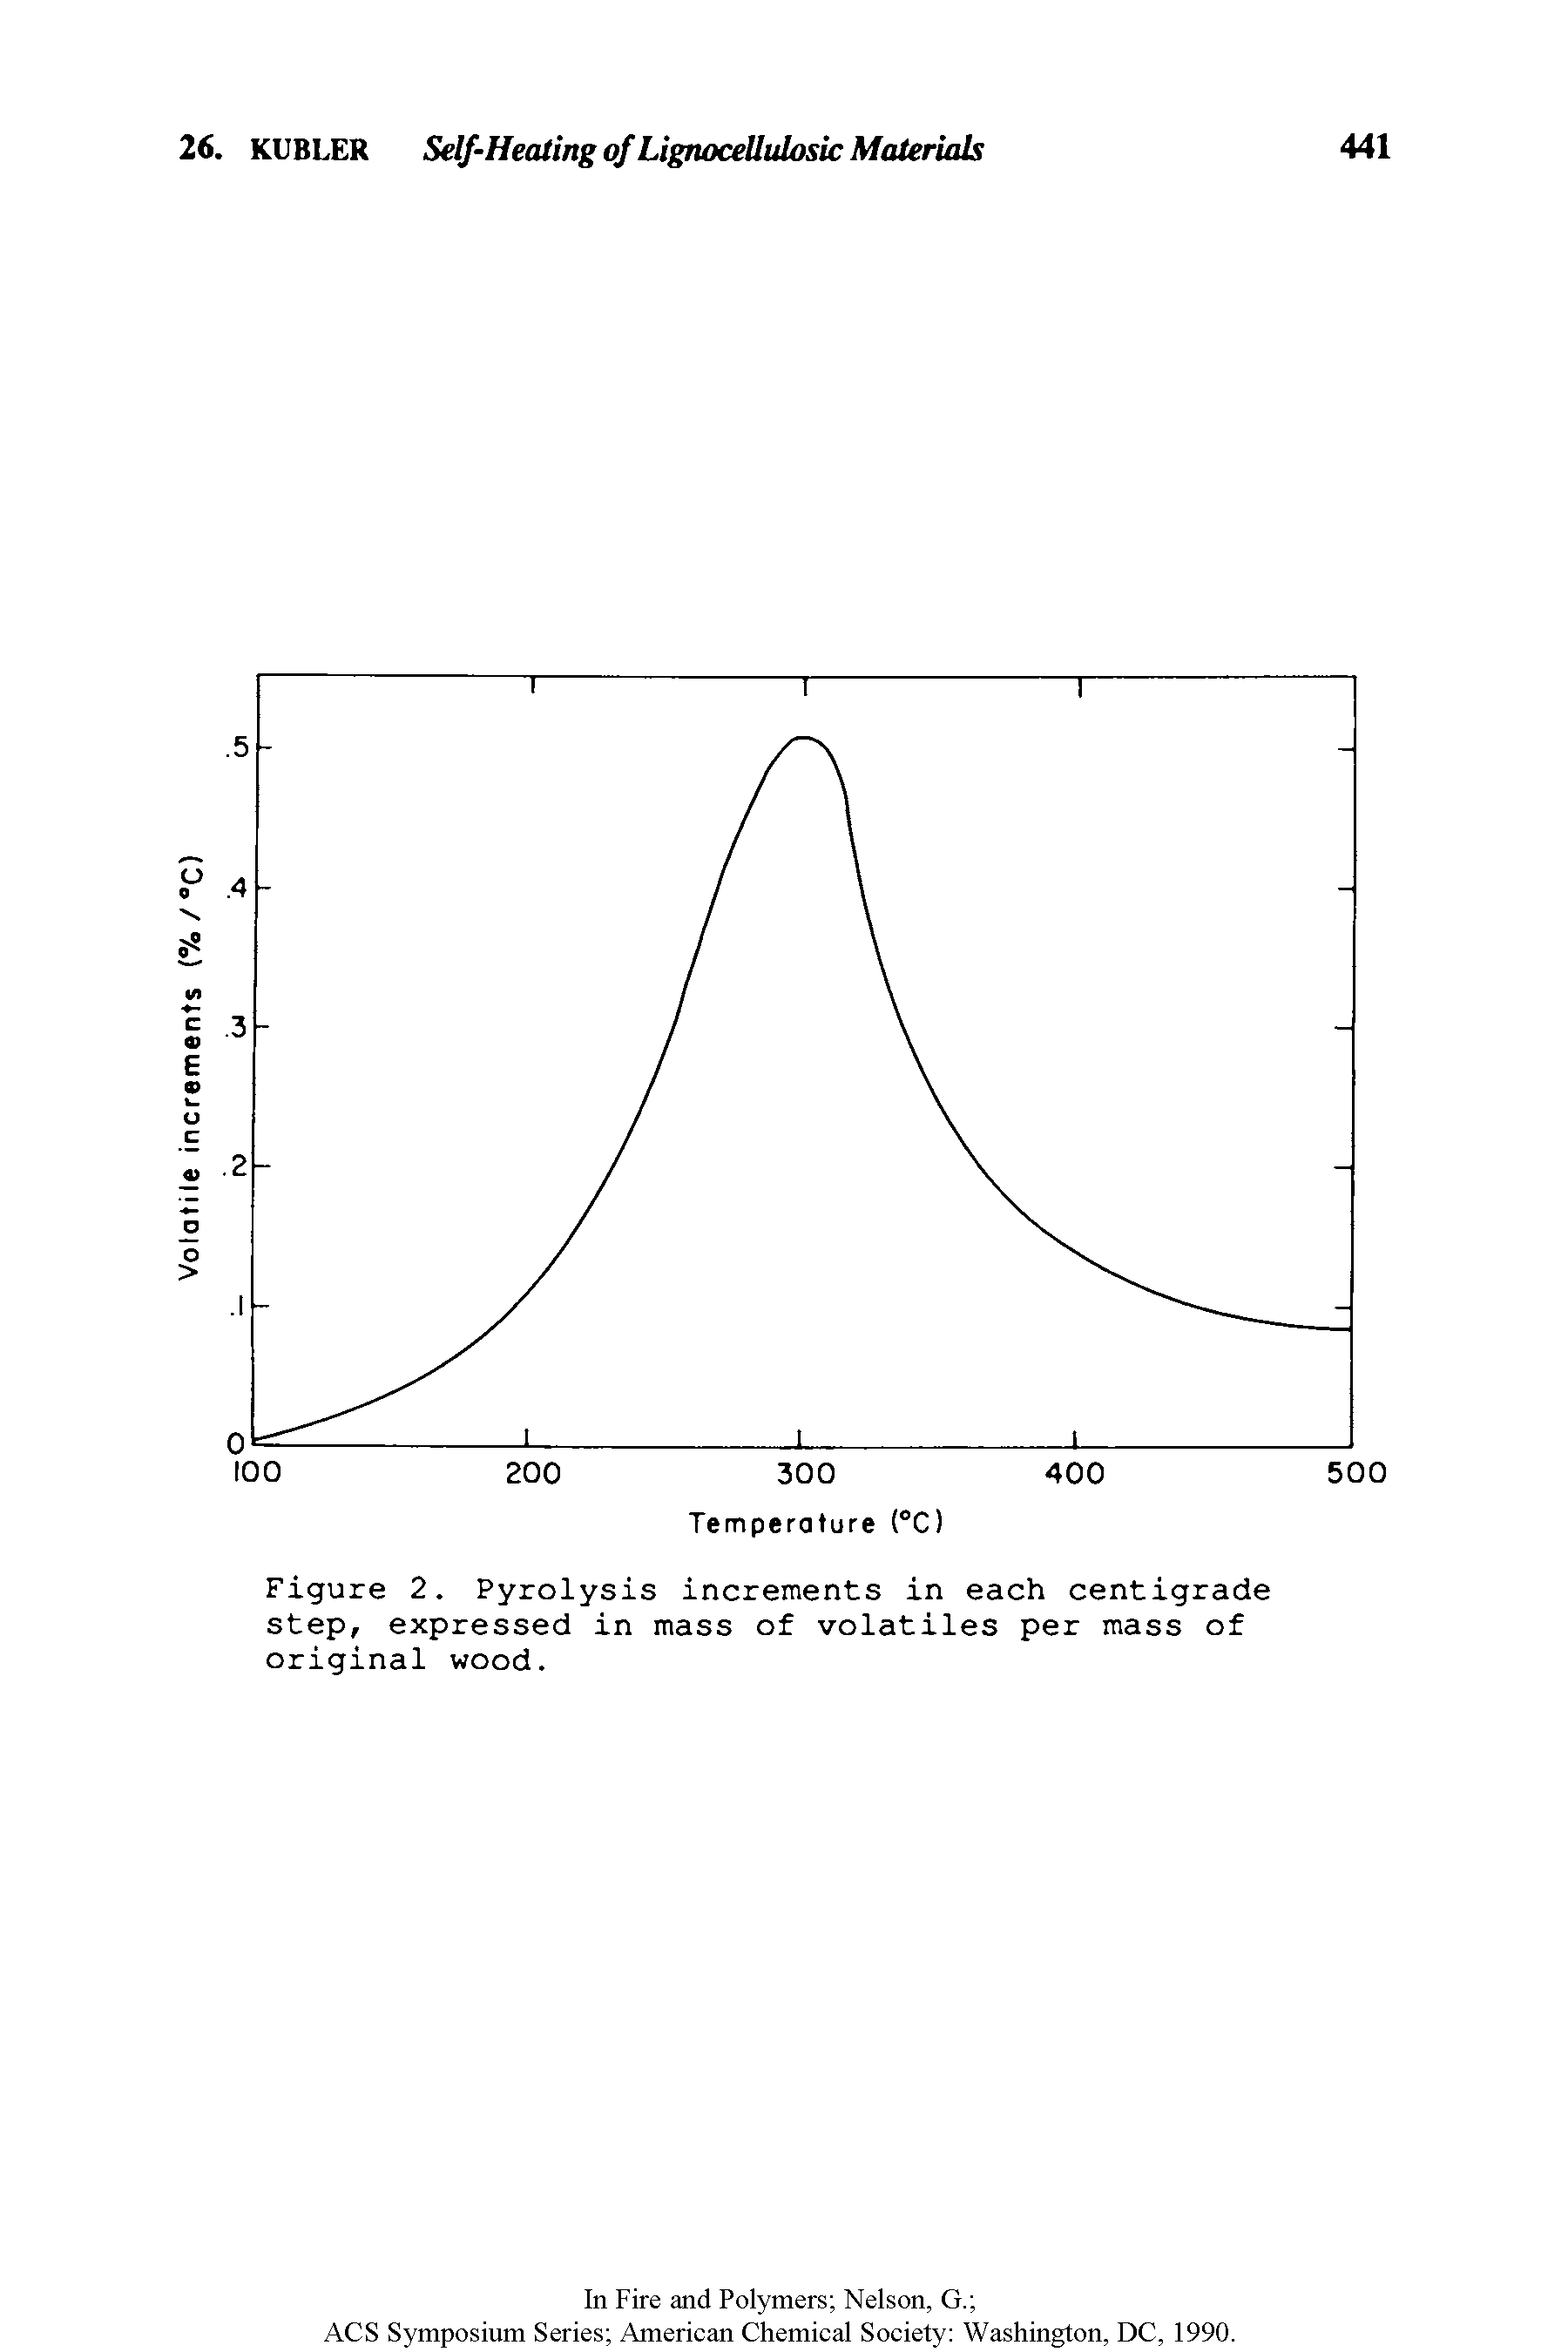 Figure 2. Pyrolysis increments in each centigrade step, expressed in mass of volatiles per mass of original wood.